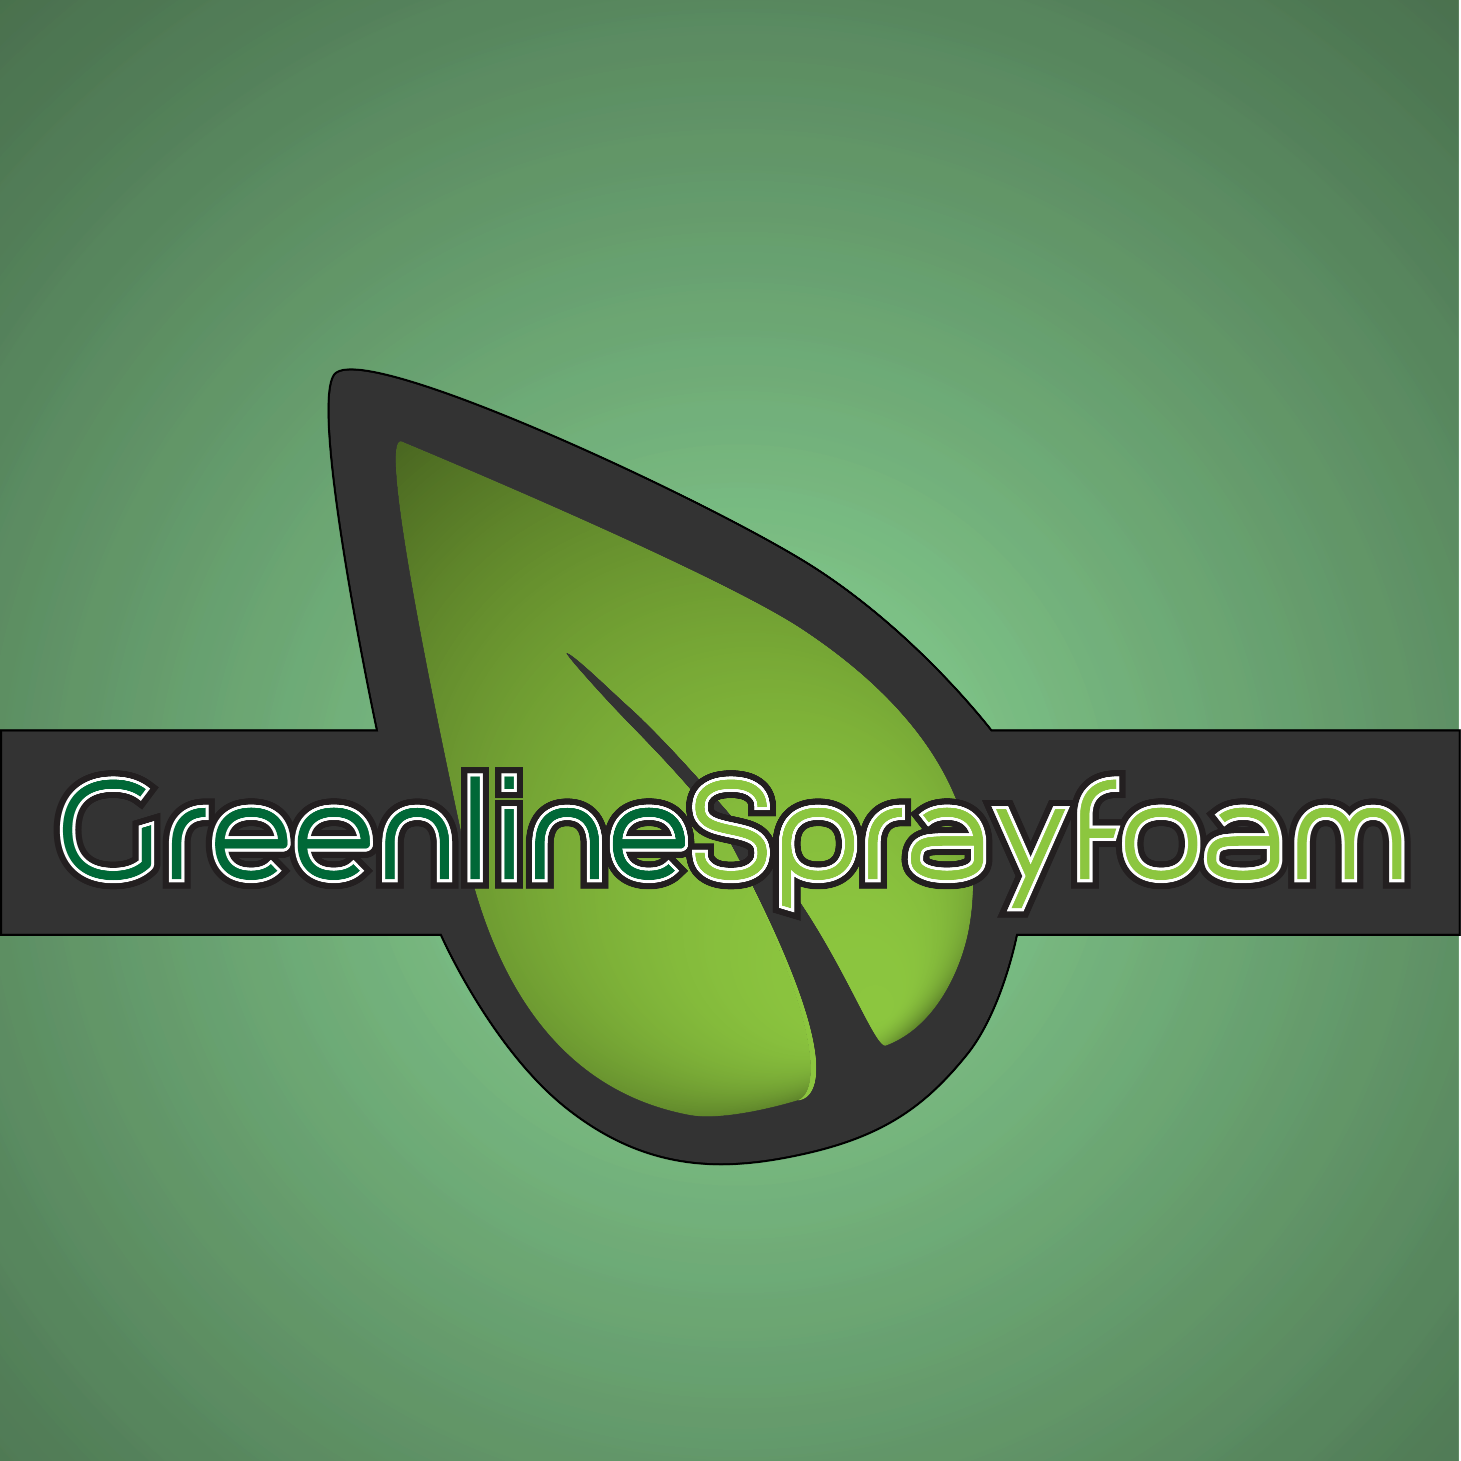 Greenline Sprayfoam is a quality assured sprayfoam company for all of your sprayfoam needs.  Residential, commercial or farm, we cater to all.